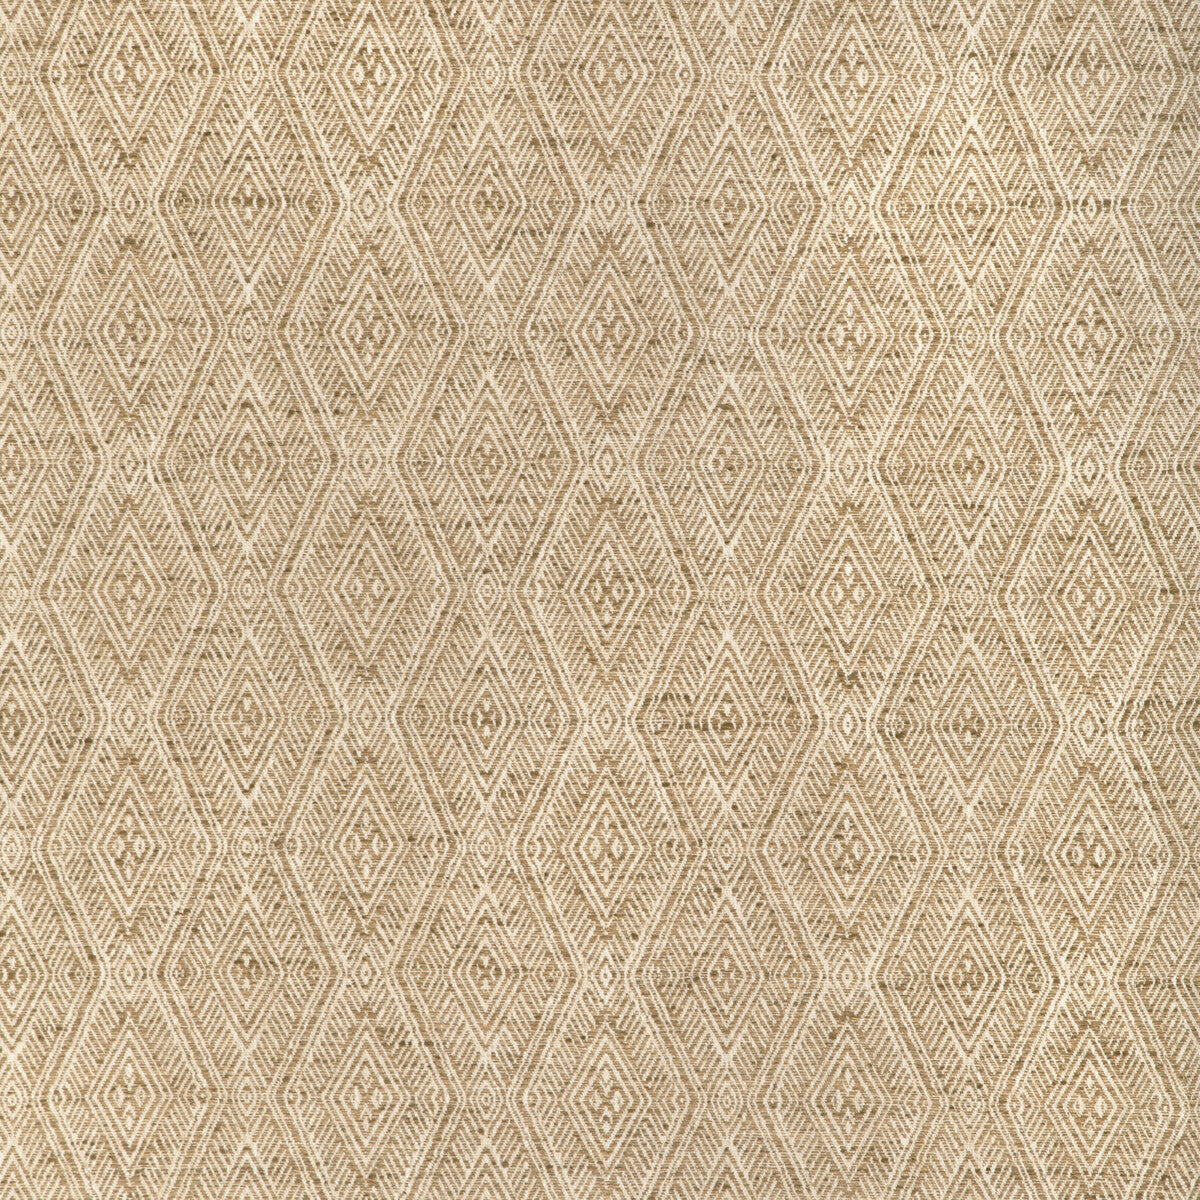 Kravet Design fabric in 37225-16 color - pattern 37225.16.0 - by Kravet Design in the Woven Colors collection